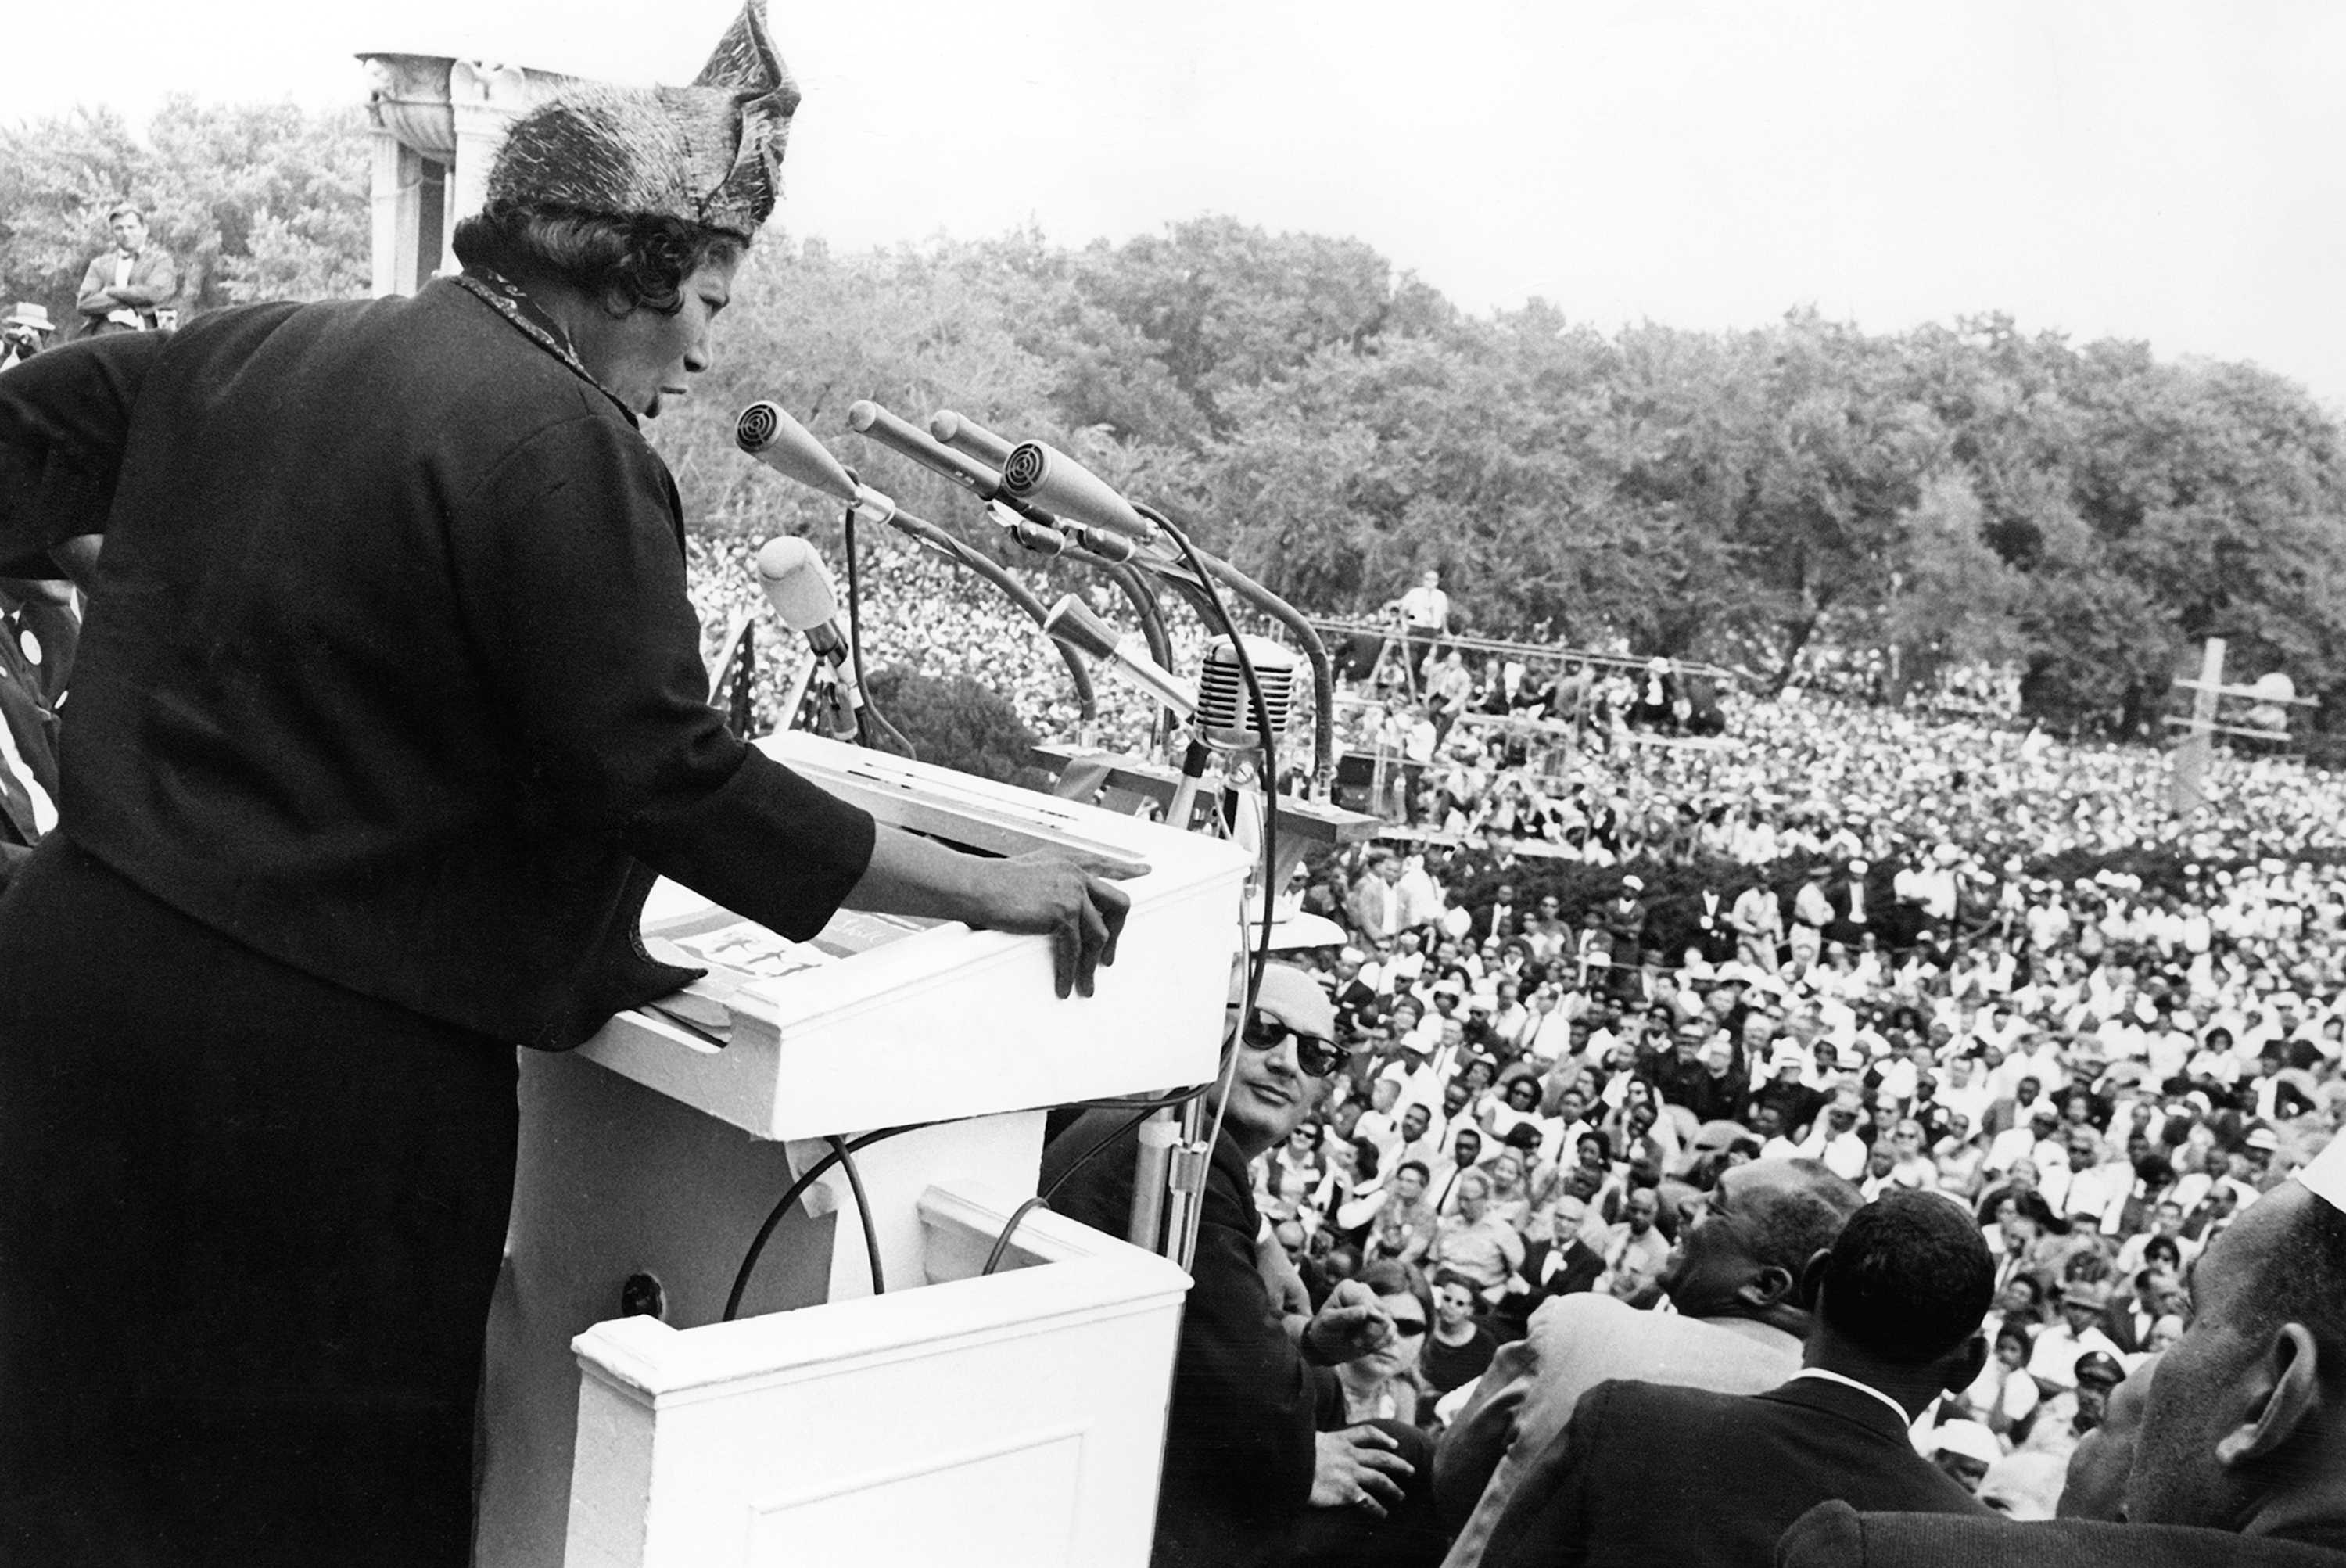 Photograph of Mahalia Jackson singing at the March on Washington for Jobs and Freedom